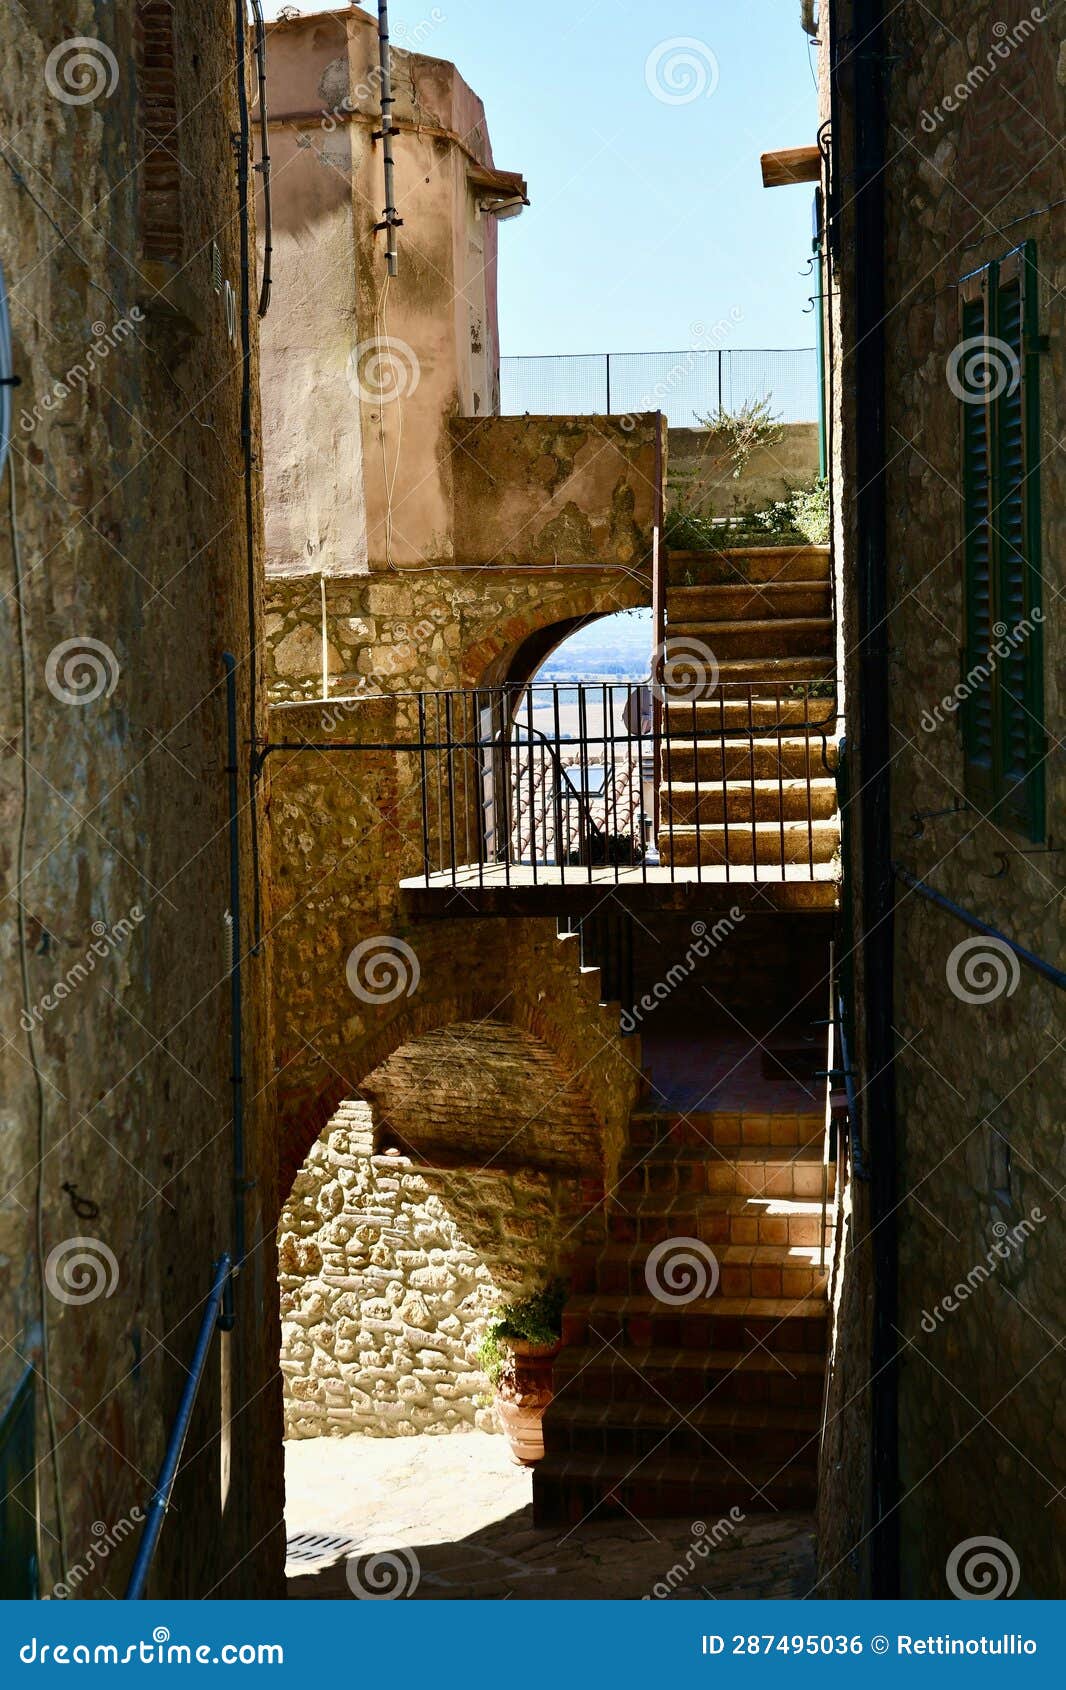 connections between various medieval buildings with stairs and bridges